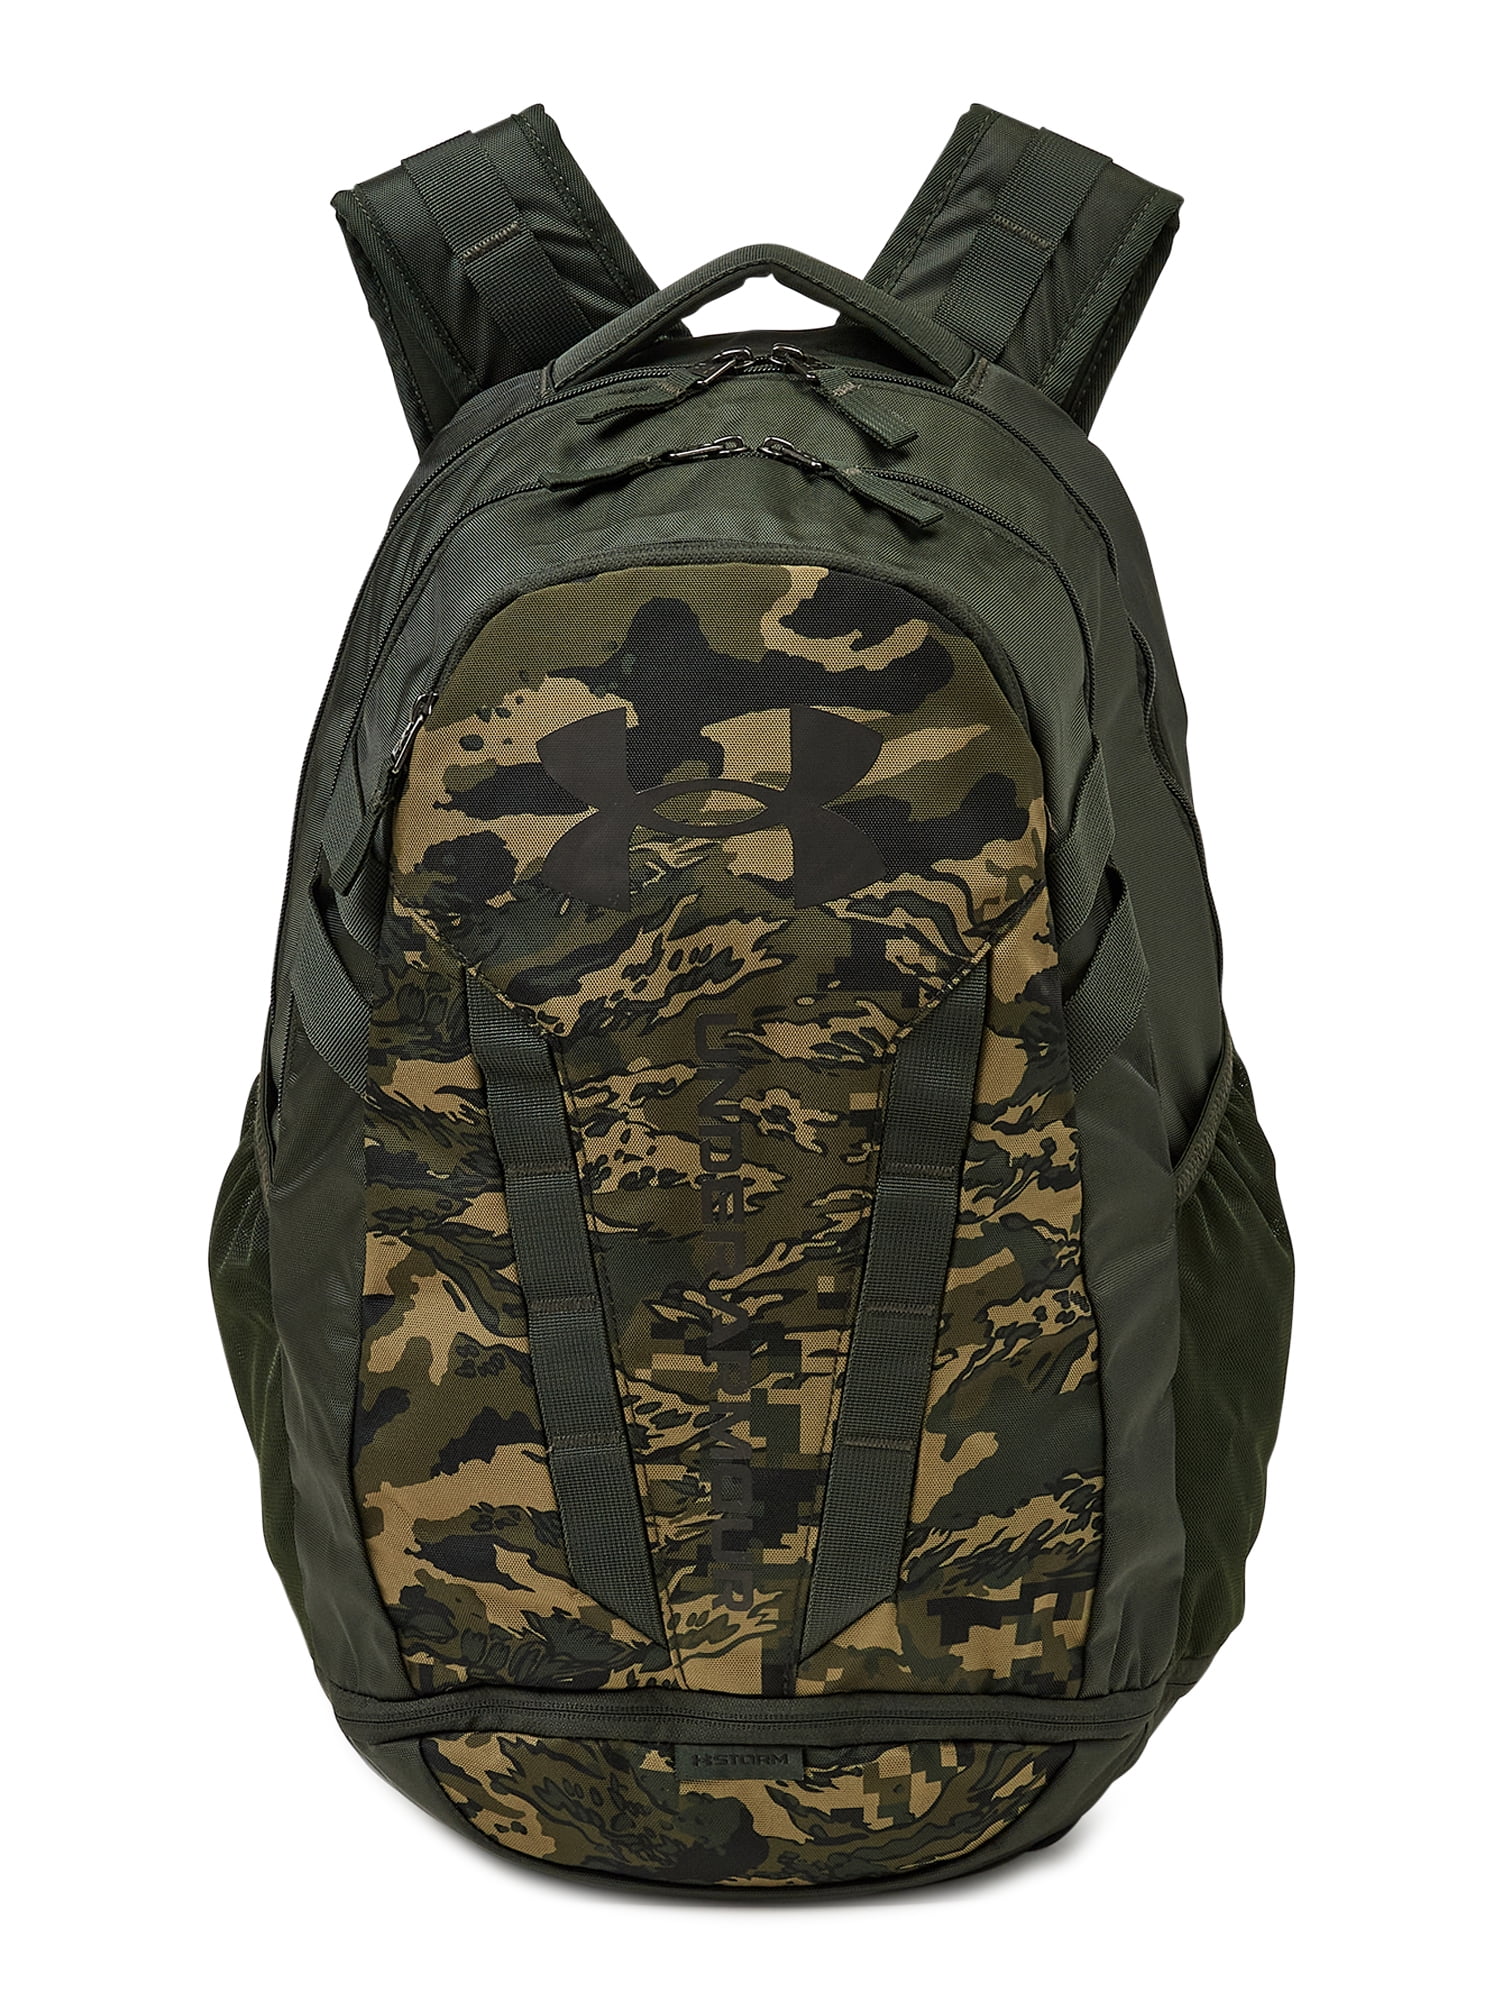 Unisex Under Armour Camo Backpack School Bag Travel Holiday Rucksack 